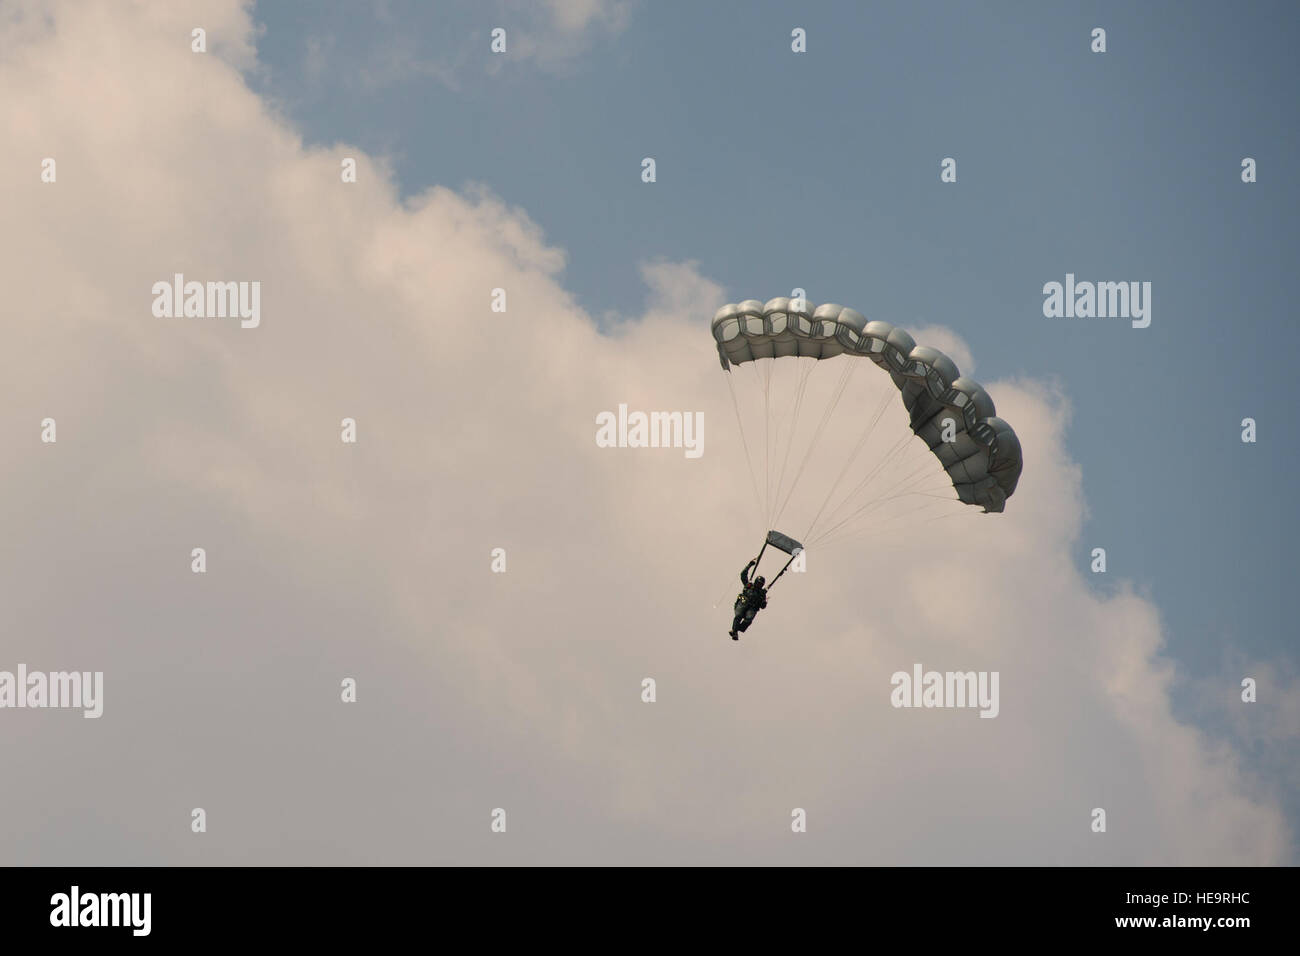 U.S. Air Force, Thai and Singaporean military conduct static and High Altitude Low Opening jumps from a U.S. C-130 during Exercise Cope Tiger 15 near Korat, Thailand, March 10, 2015. CT15 includes 22 total flying units and over 1,390 personnel from three countries and continues the growth of strong, interoperable and beneficial relationships within the Asia-Pacific region through integration of airborne and land-based command and control assets.  Airman 1st Class Taylor Queen Stock Photo